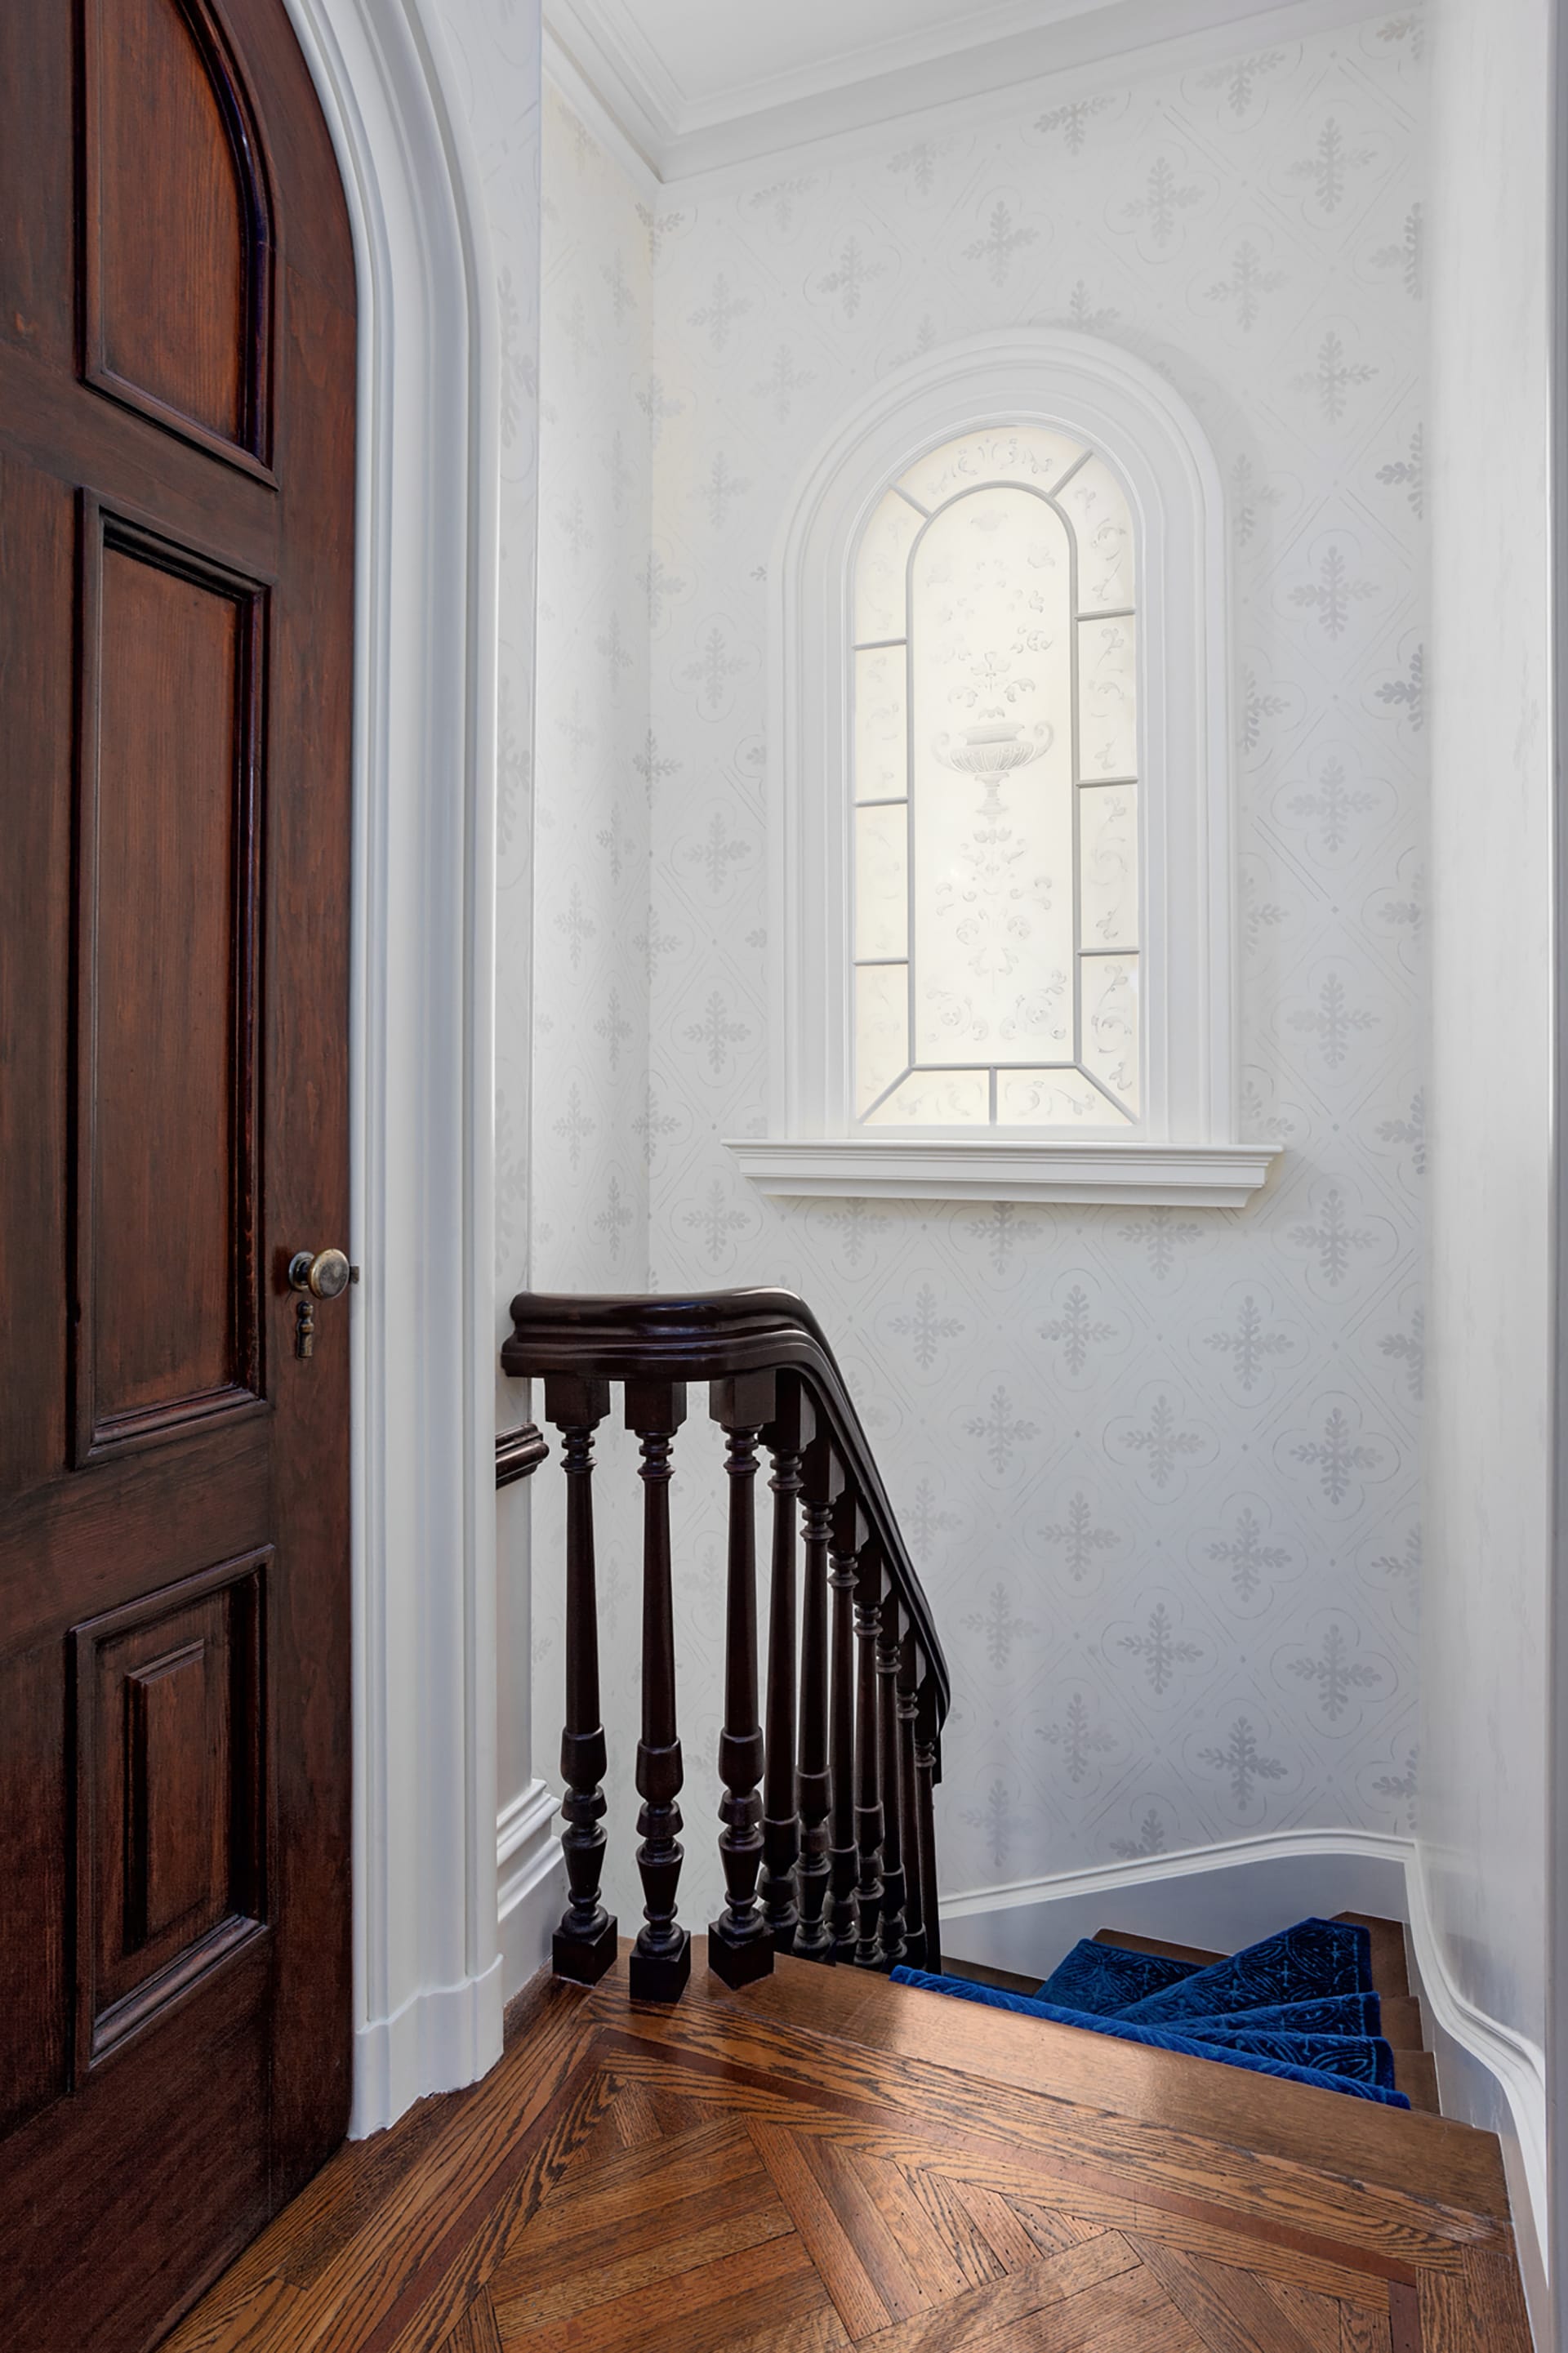 Stair hallway after renovation with artificially-lit etched window, white wallpaper, and royal blue stair runner